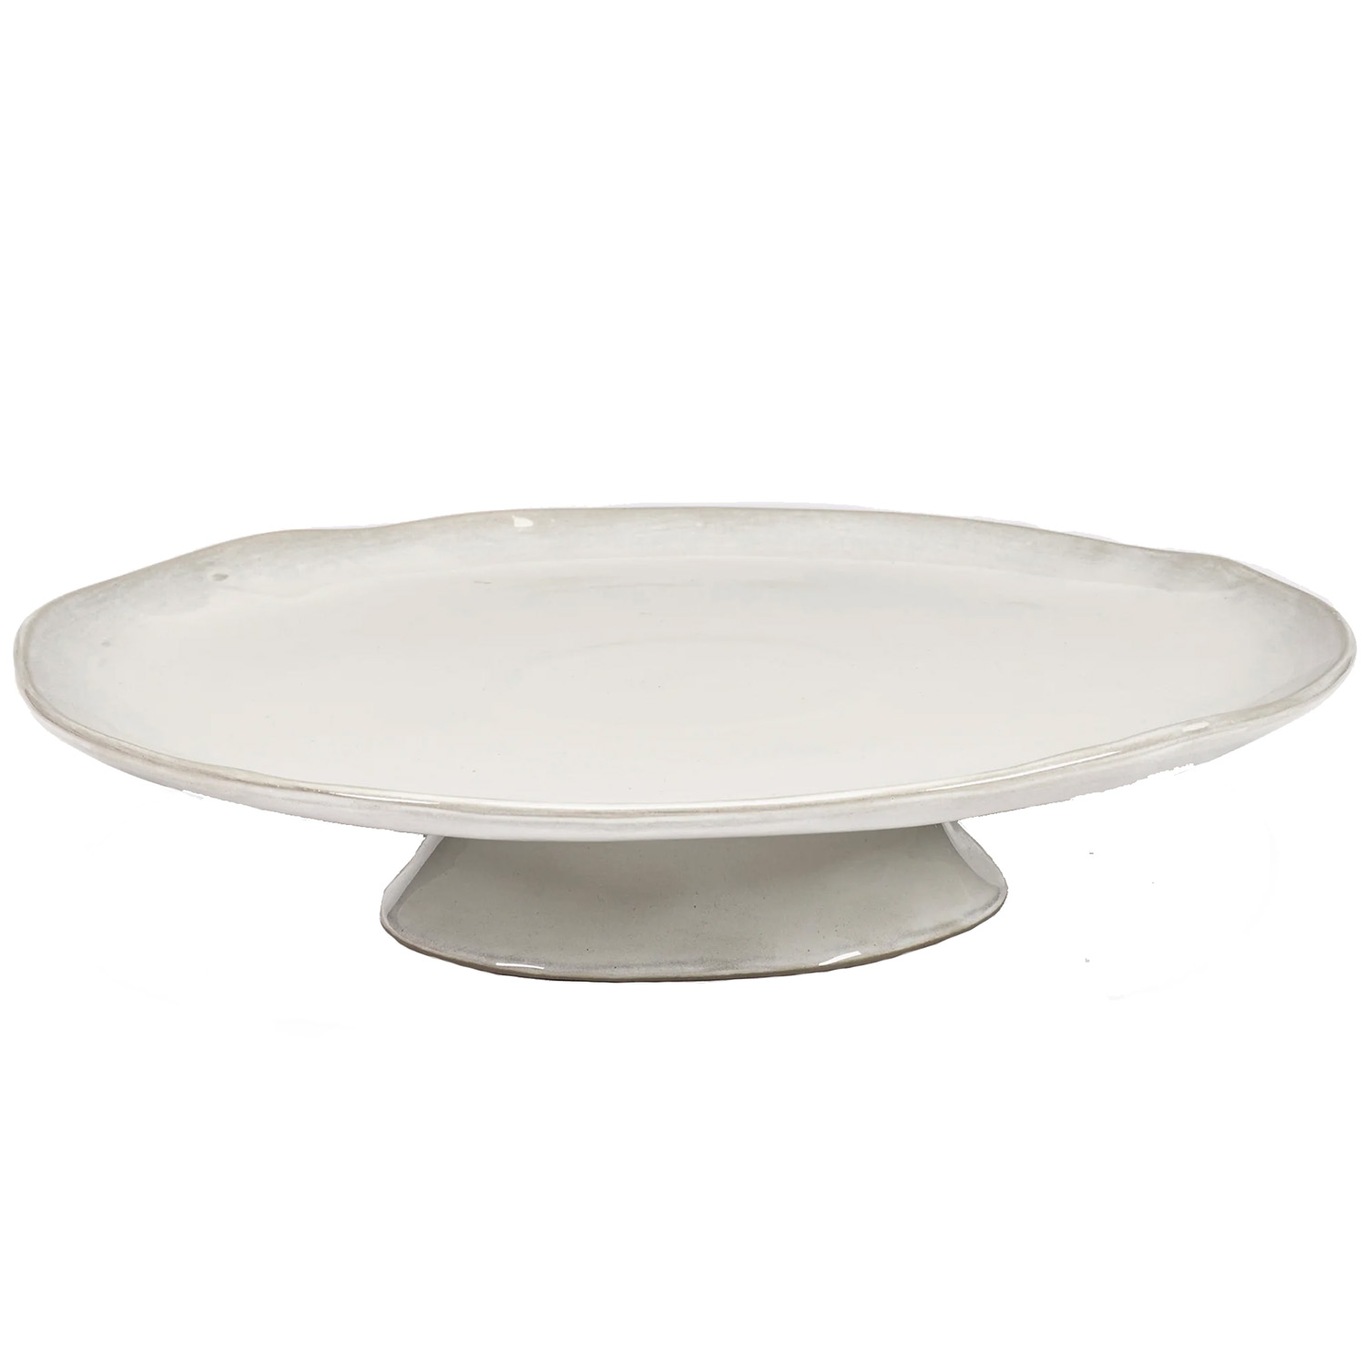 La Mère Serving Dish With Foot, Off-white